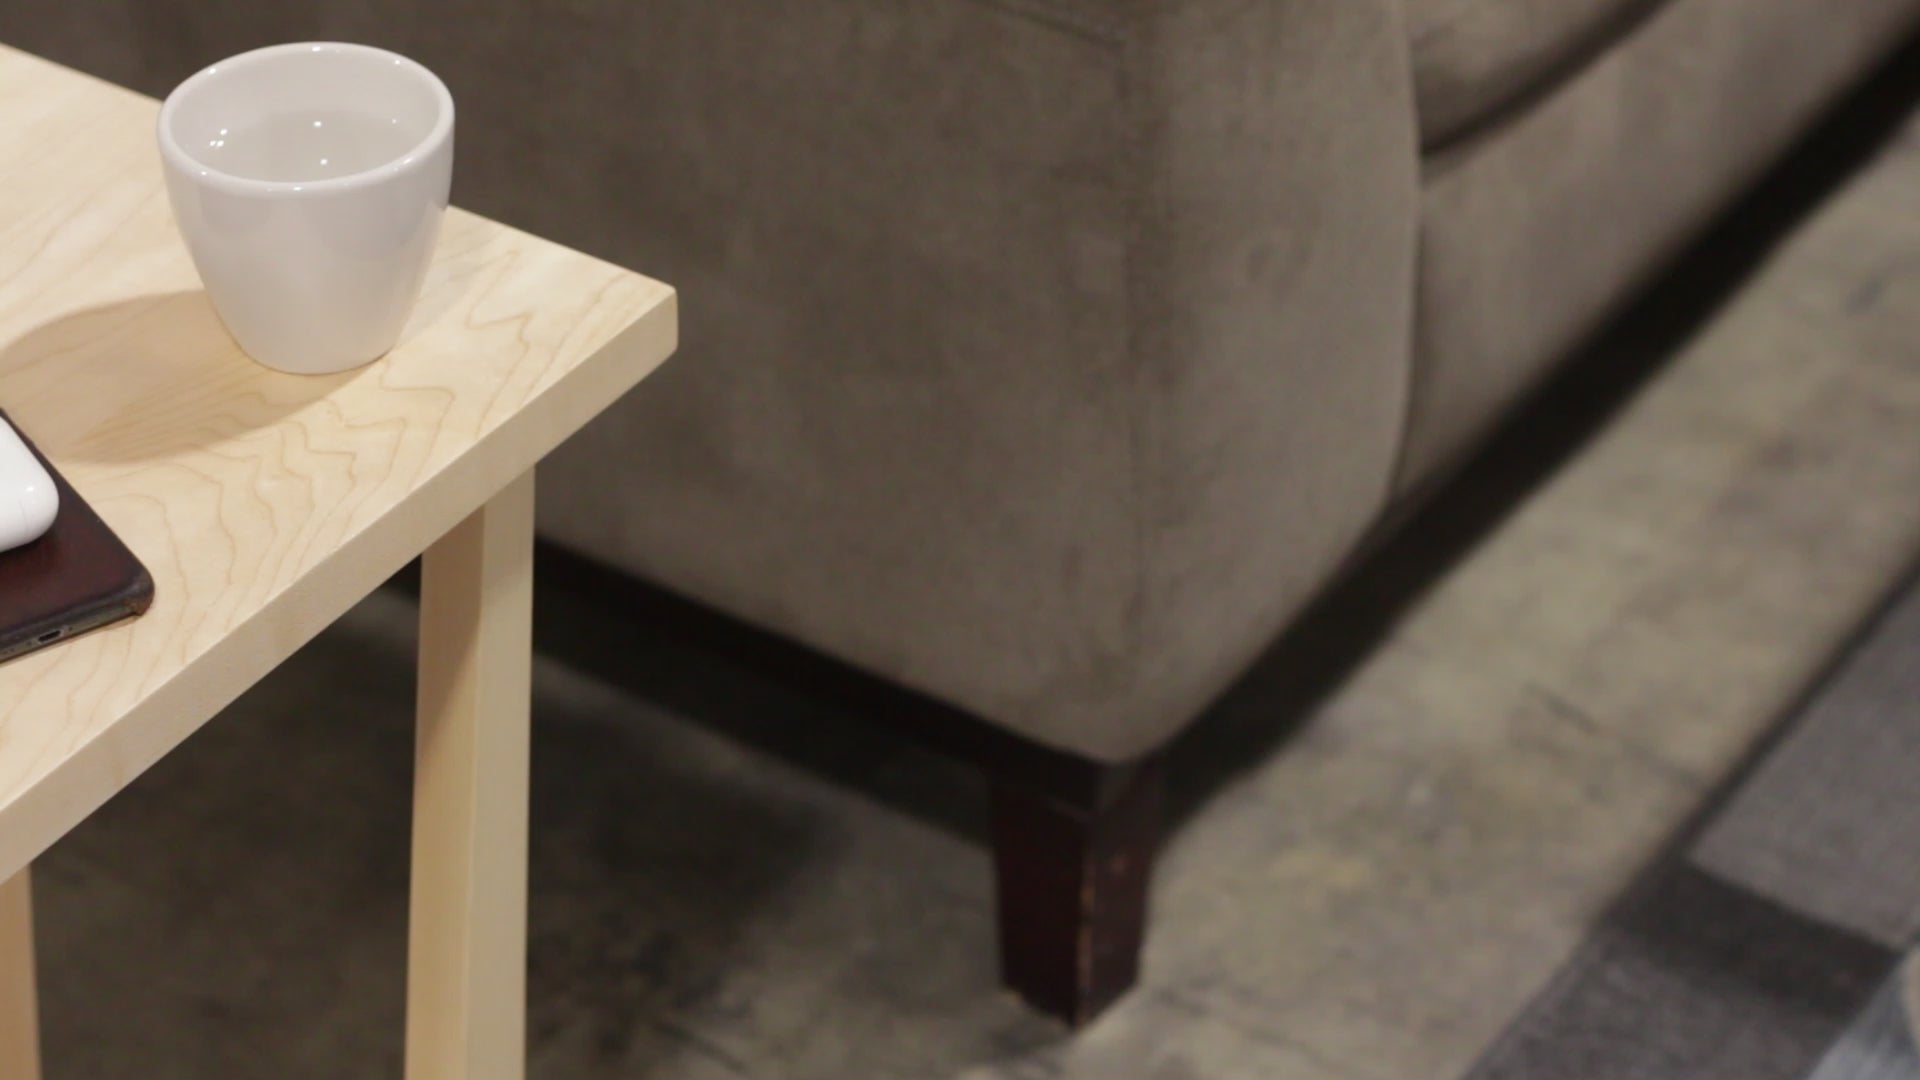 A side table placed in a living room with a plant and coffee mug sat on the table top. The side table is made from light maple hardwood and is crafted in Scandinavian minimalist modern design.